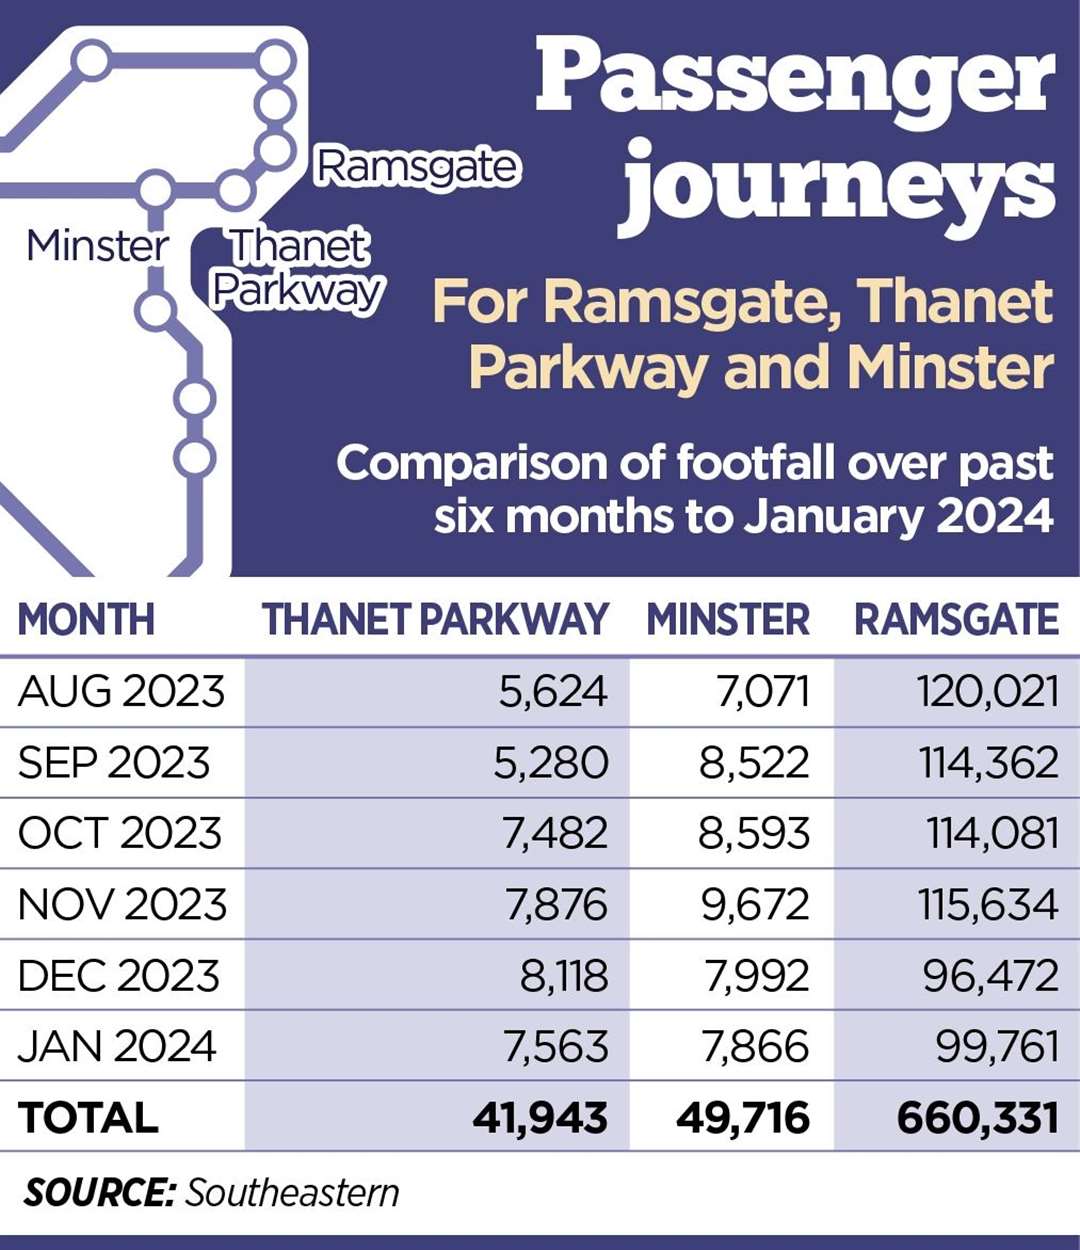 The number of passenger journeys at Thanet Parkway, Minster and Ramsgate each month since the new station opened